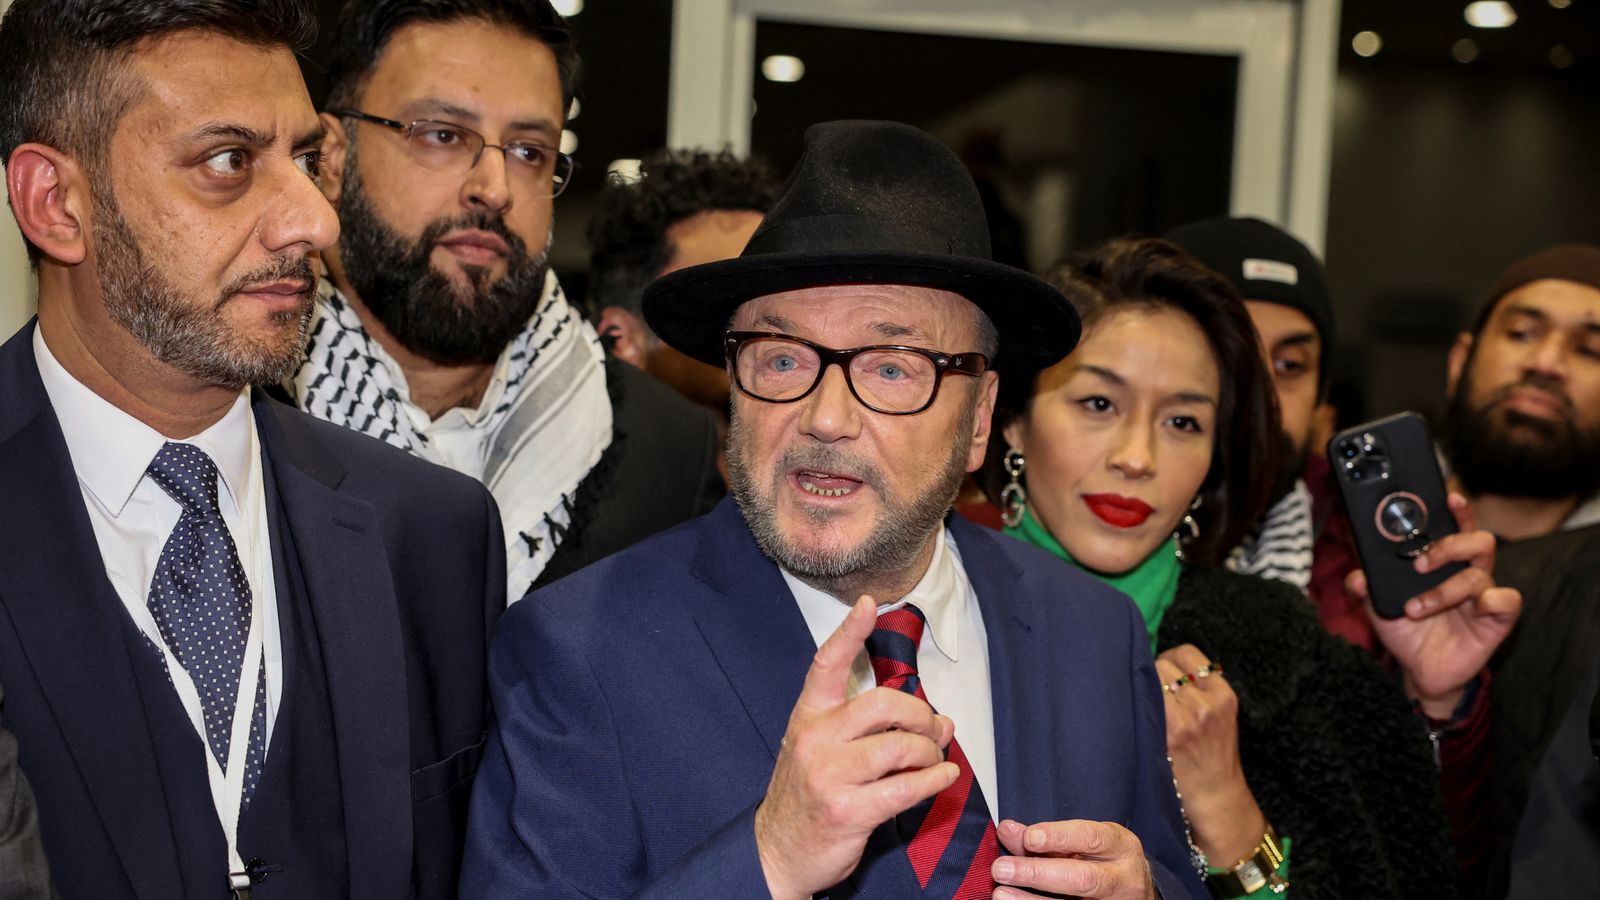 Rochdale by-election: George Galloway only won because Labour ditched candidate, says Starmer